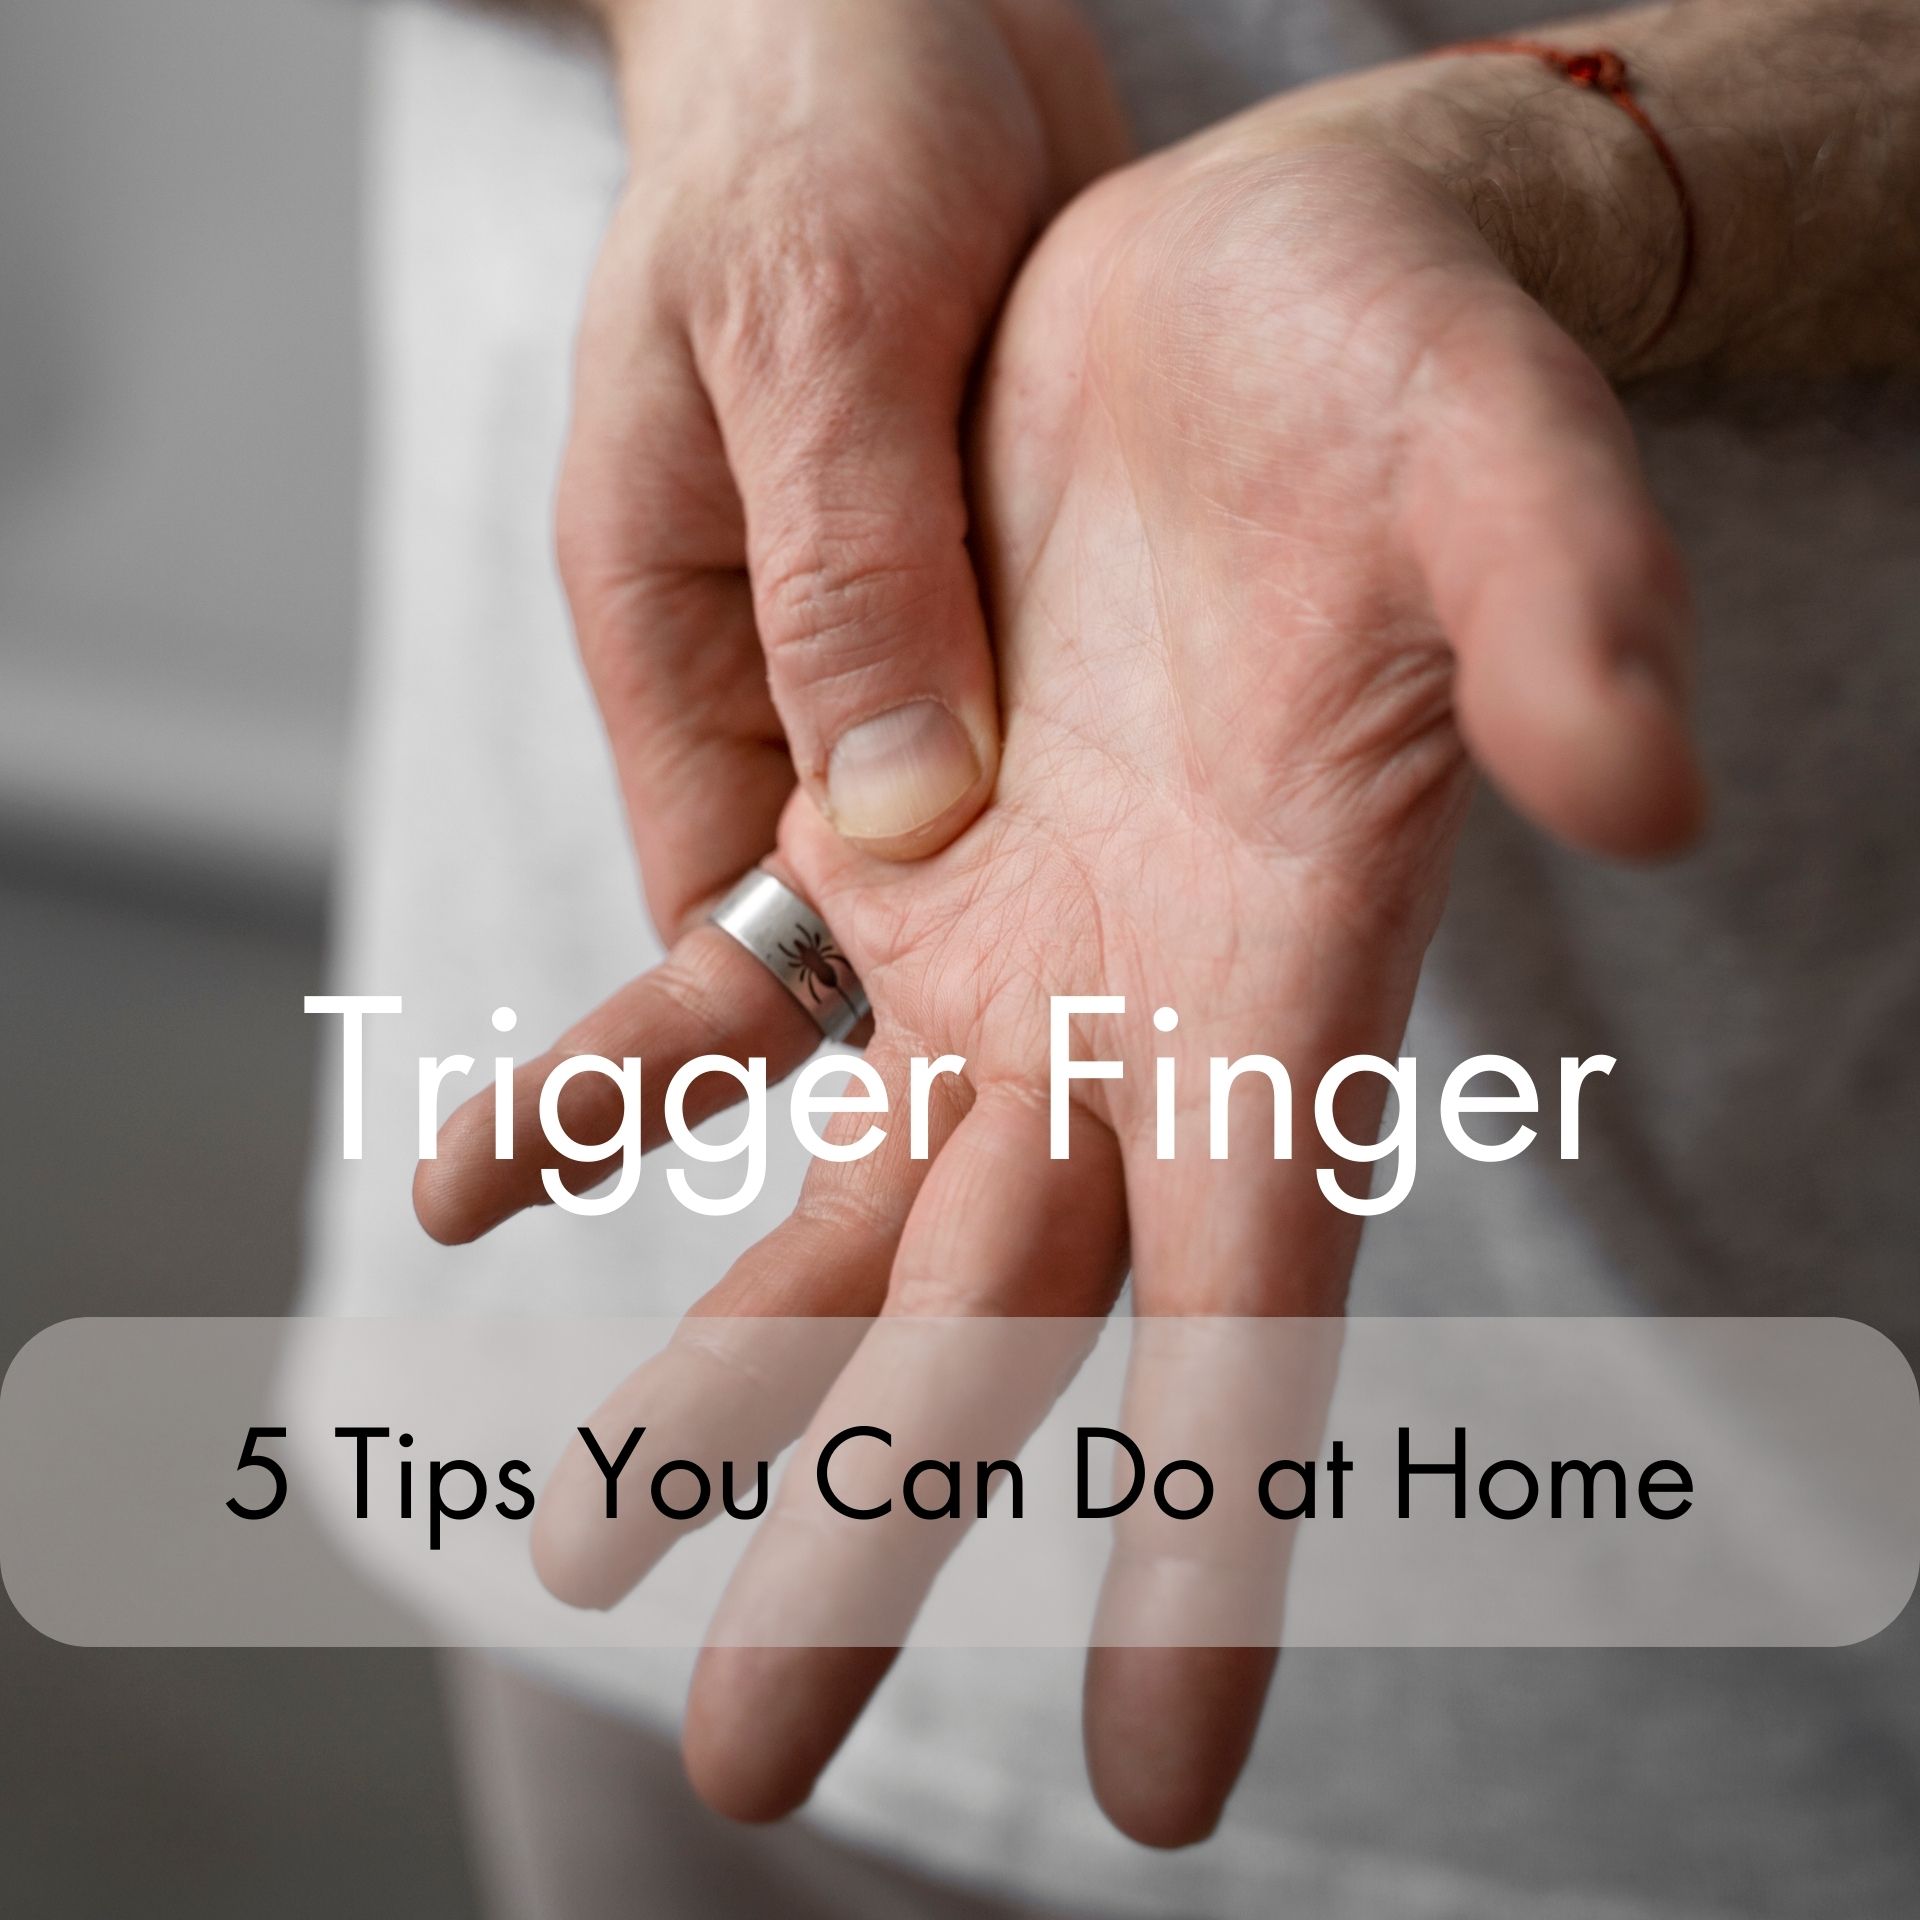 5 Tips You Can Do at Home for Trigger Finger